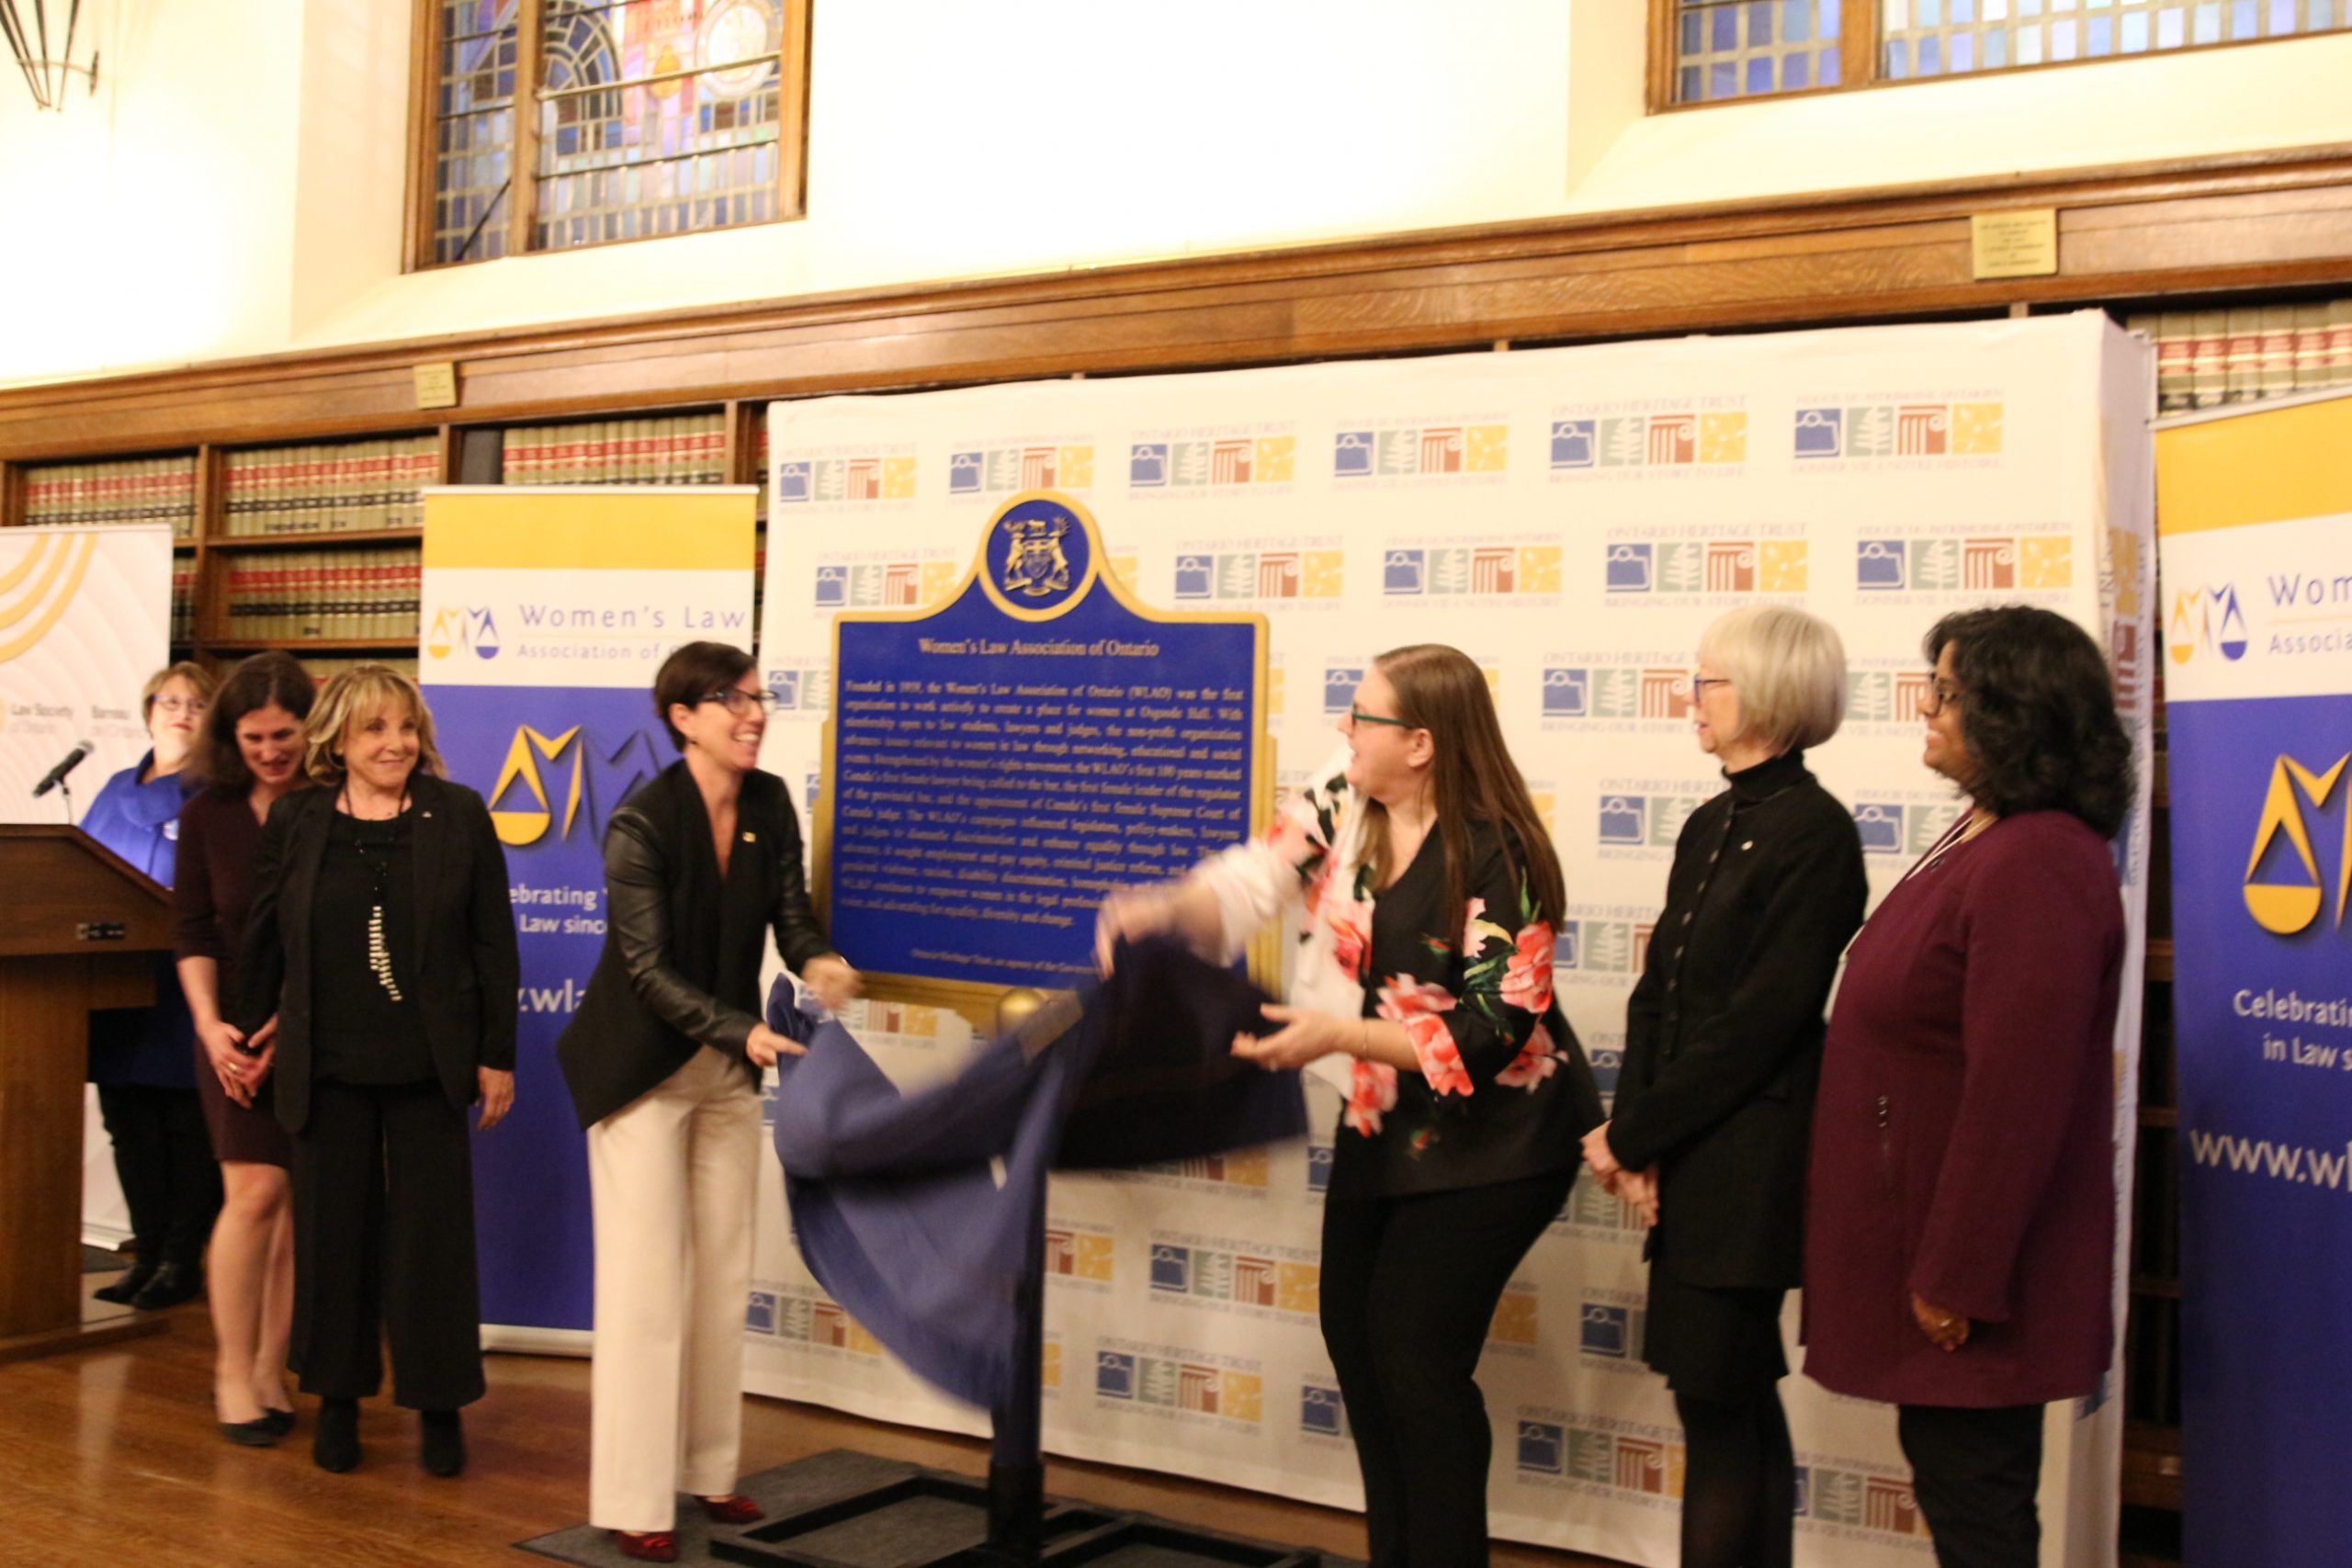 A group of women smiling as a plaque is unveiled to celebrate 100 years of The WLAO.